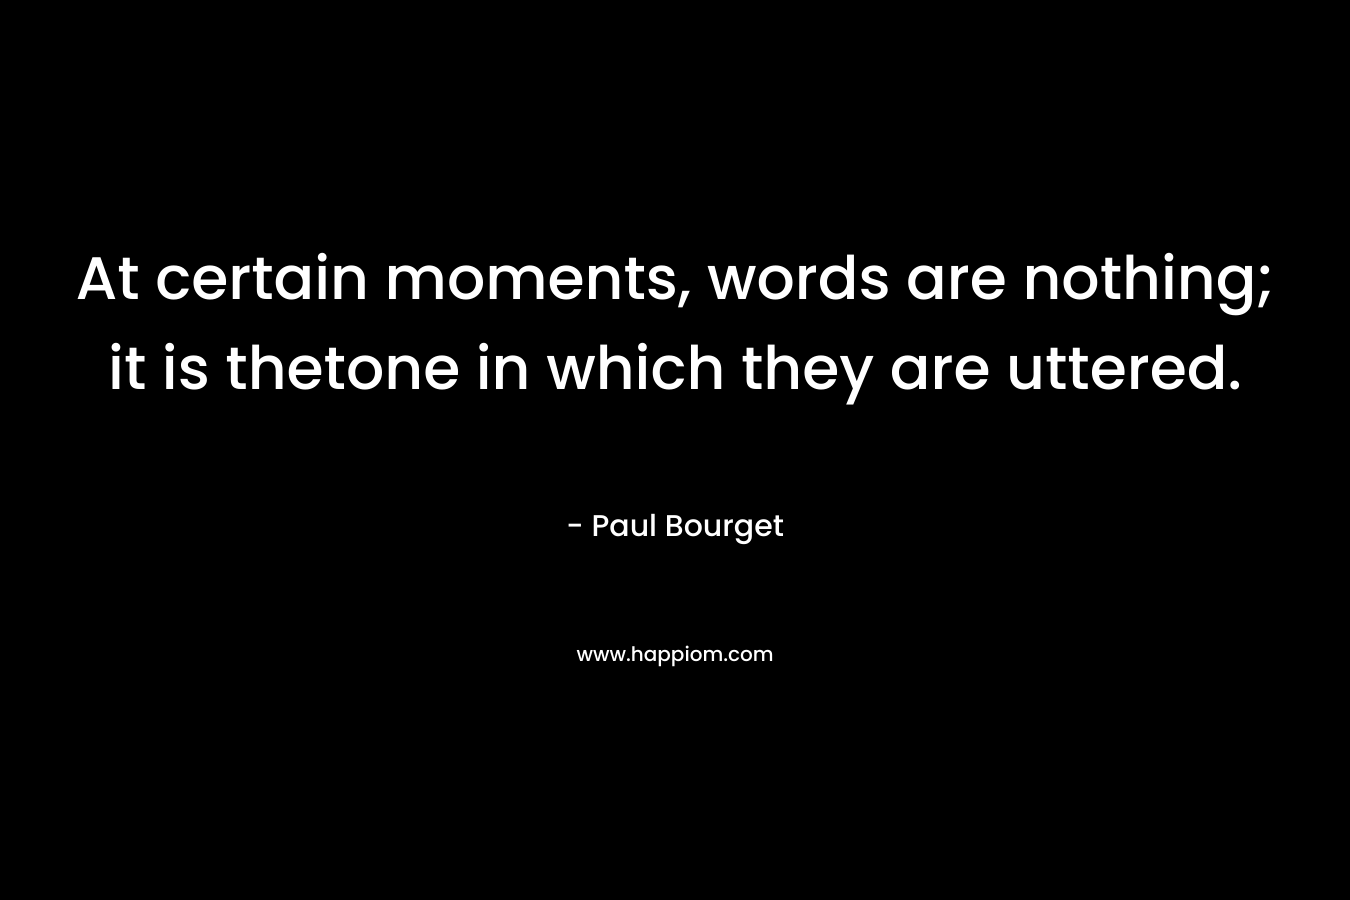 At certain moments, words are nothing; it is thetone in which they are uttered. – Paul Bourget